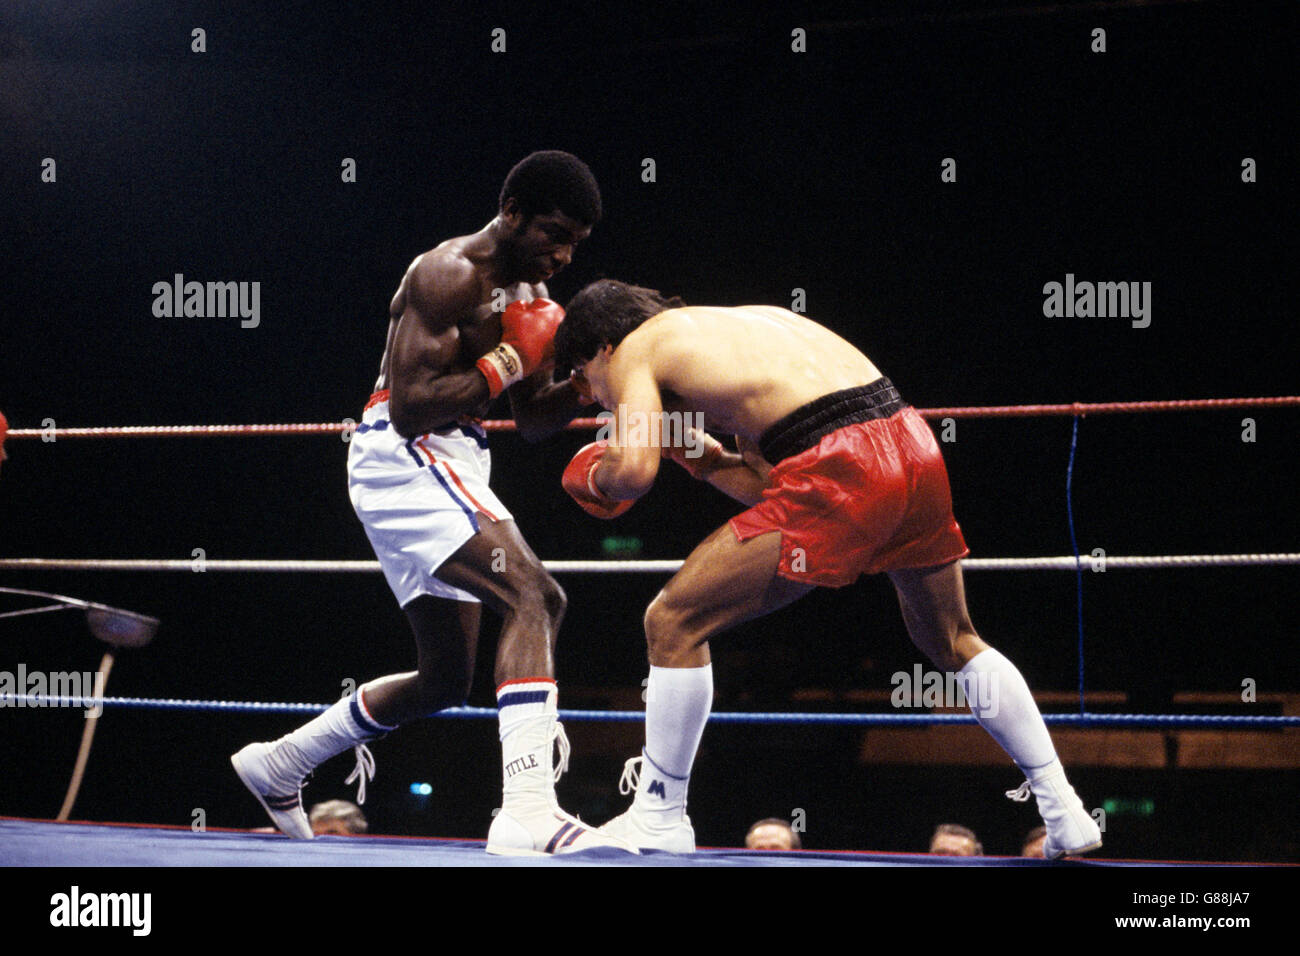 Guillermo (Memo) Arreola (r) of the USA, ducks under an onslaught from Great Britain's Clinton McKenzie (l) Stock Photo